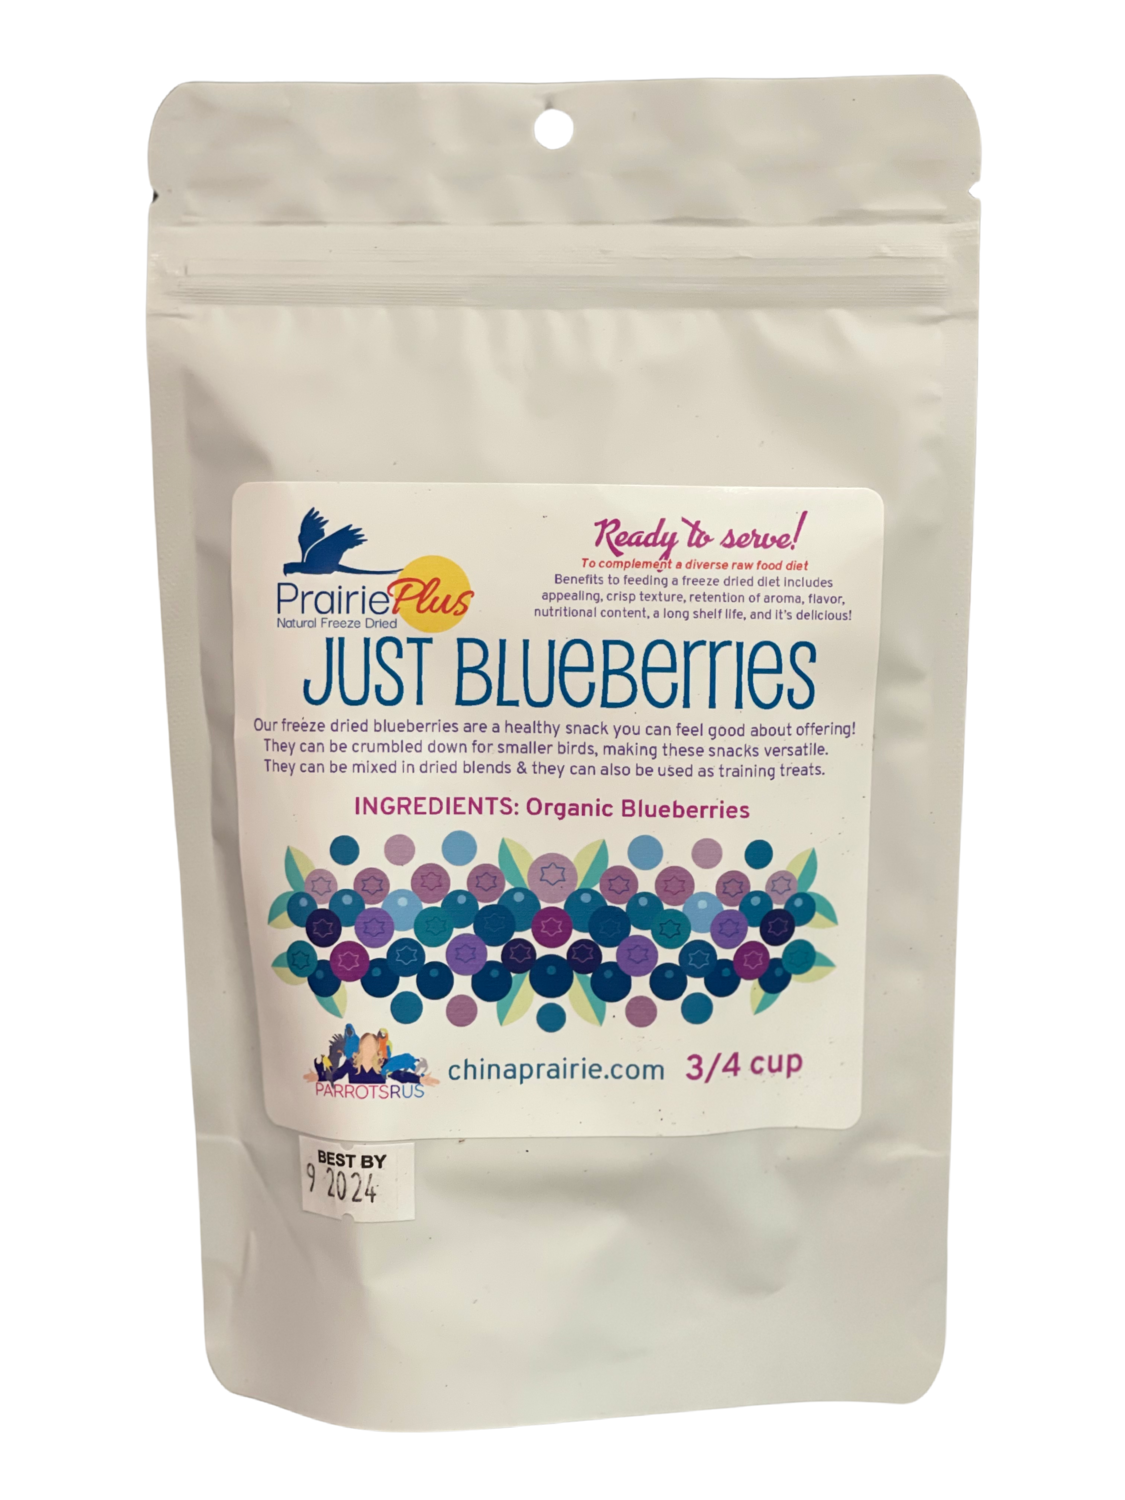 Just Blueberries! 3/4 Cup by China Prairie